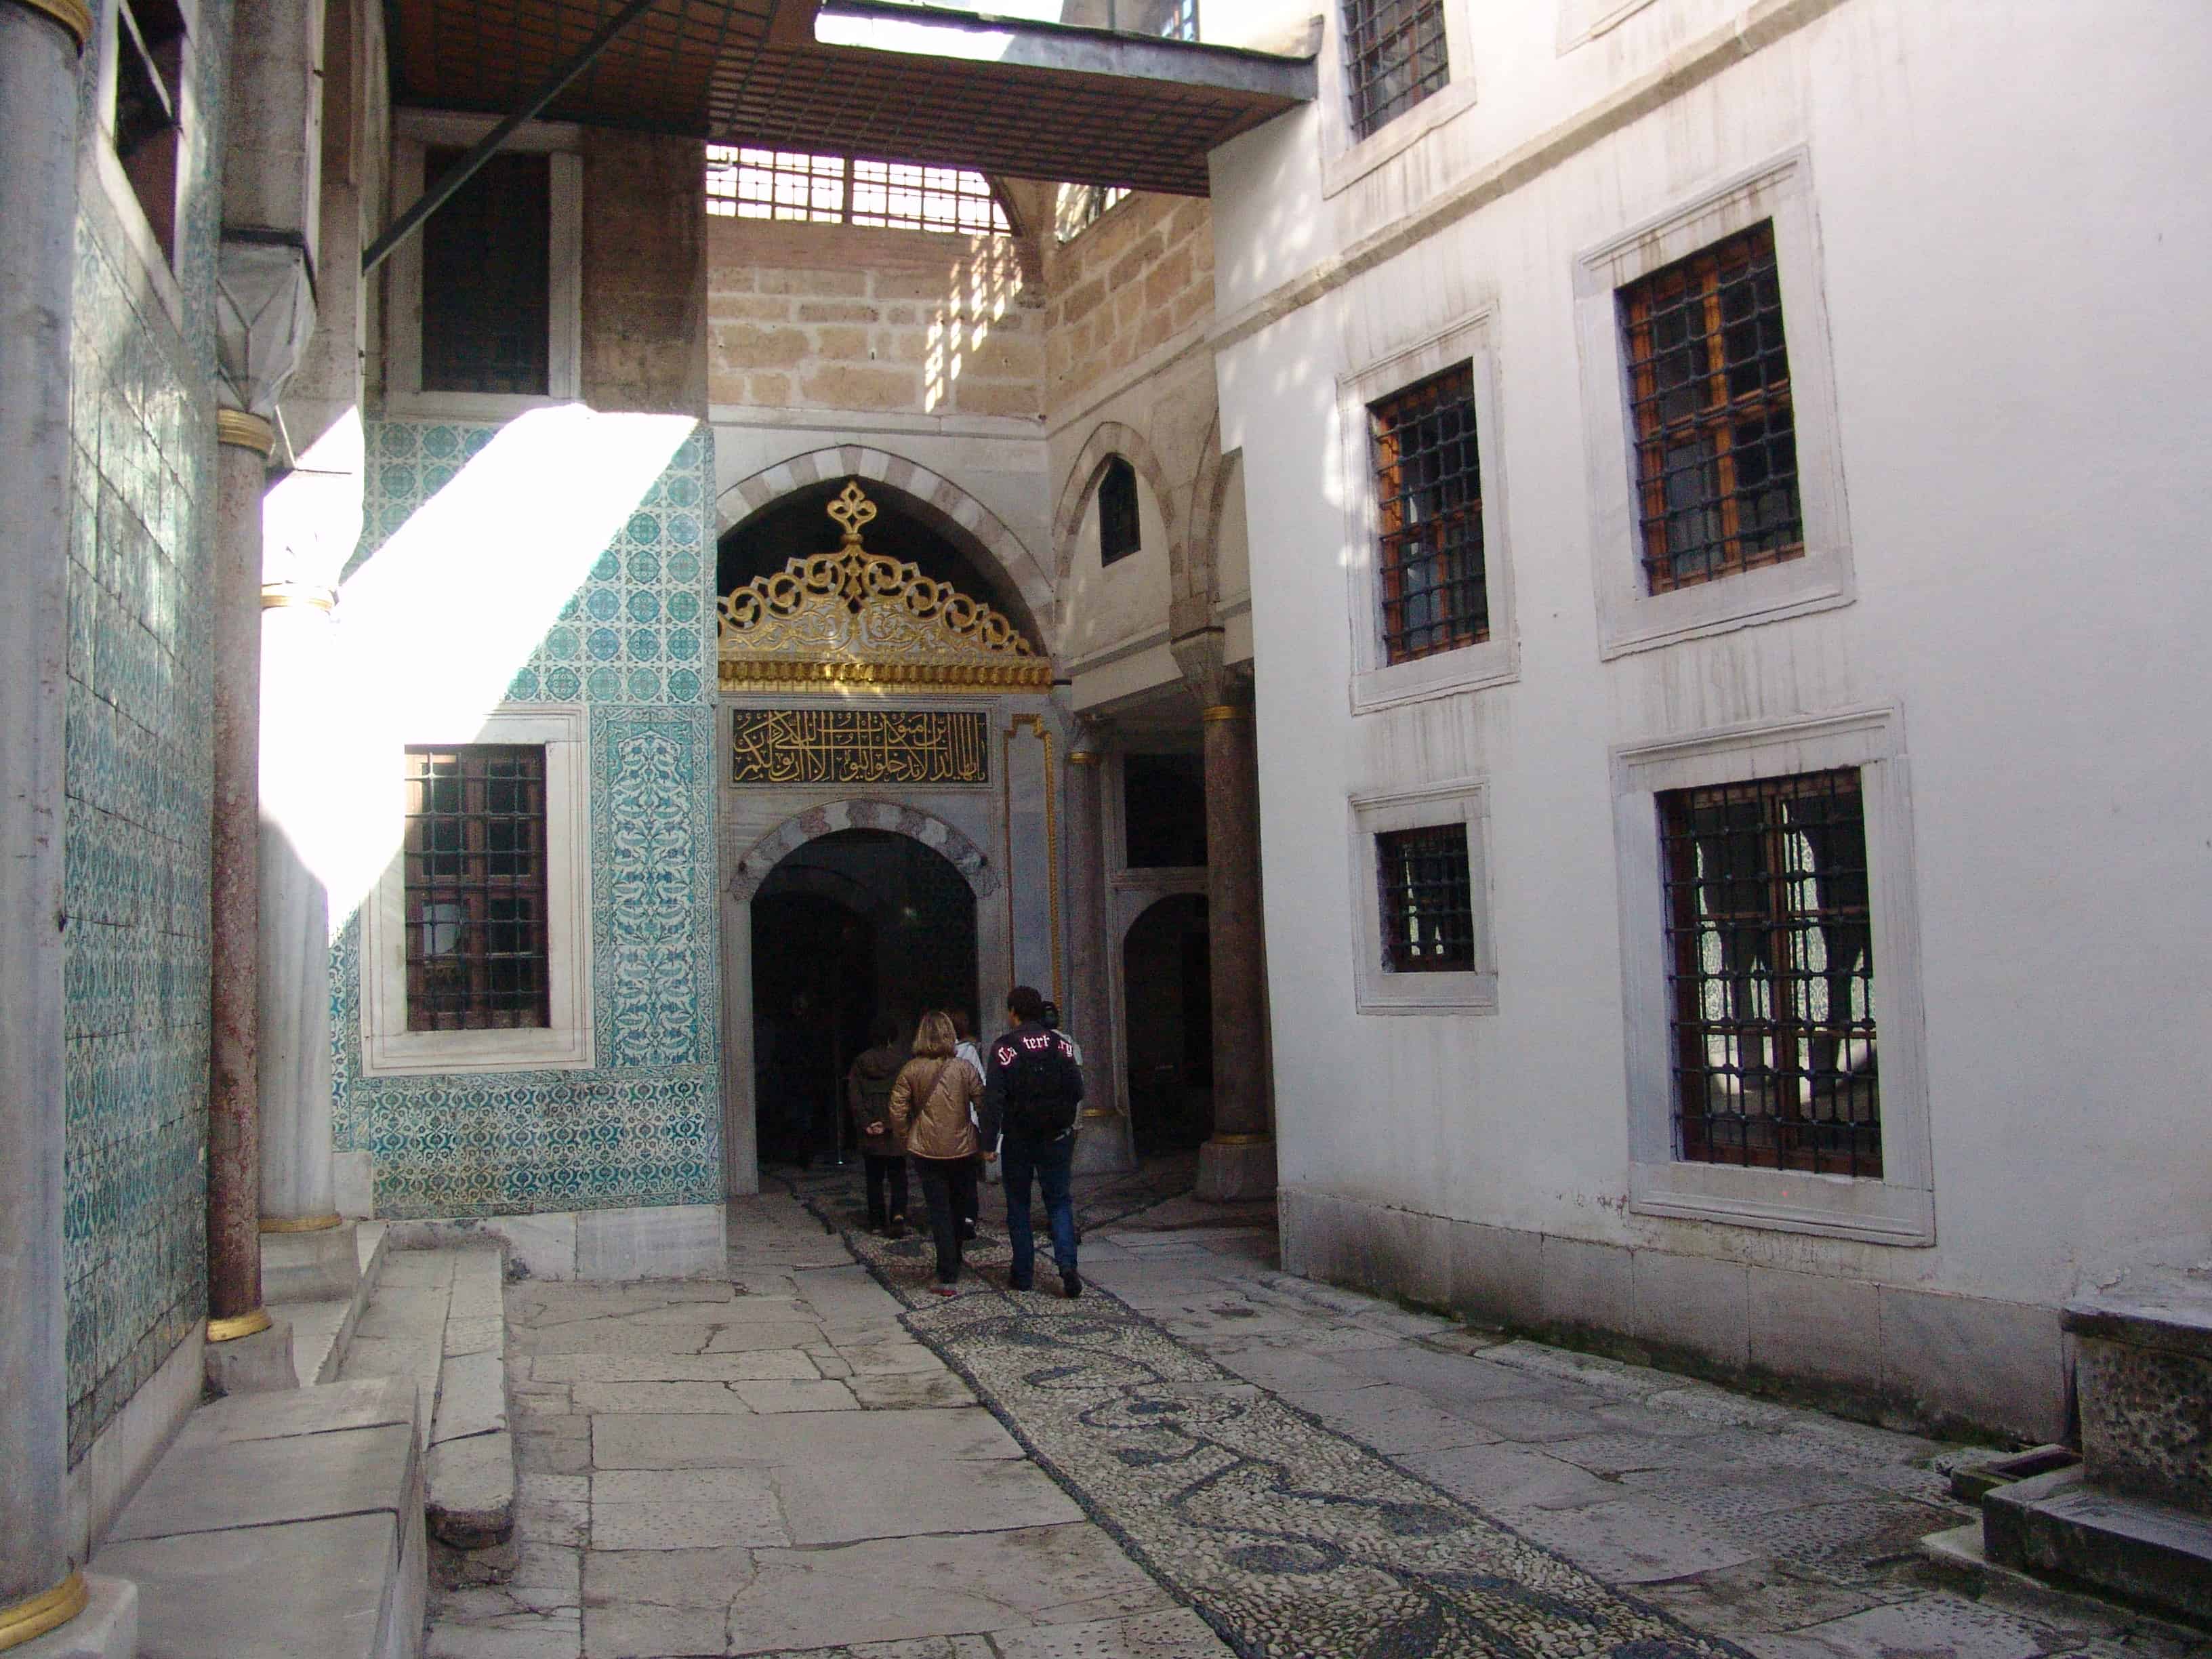 Main Gate in the Imperial Harem at Topkapi Palace in Istanbul, Turkey